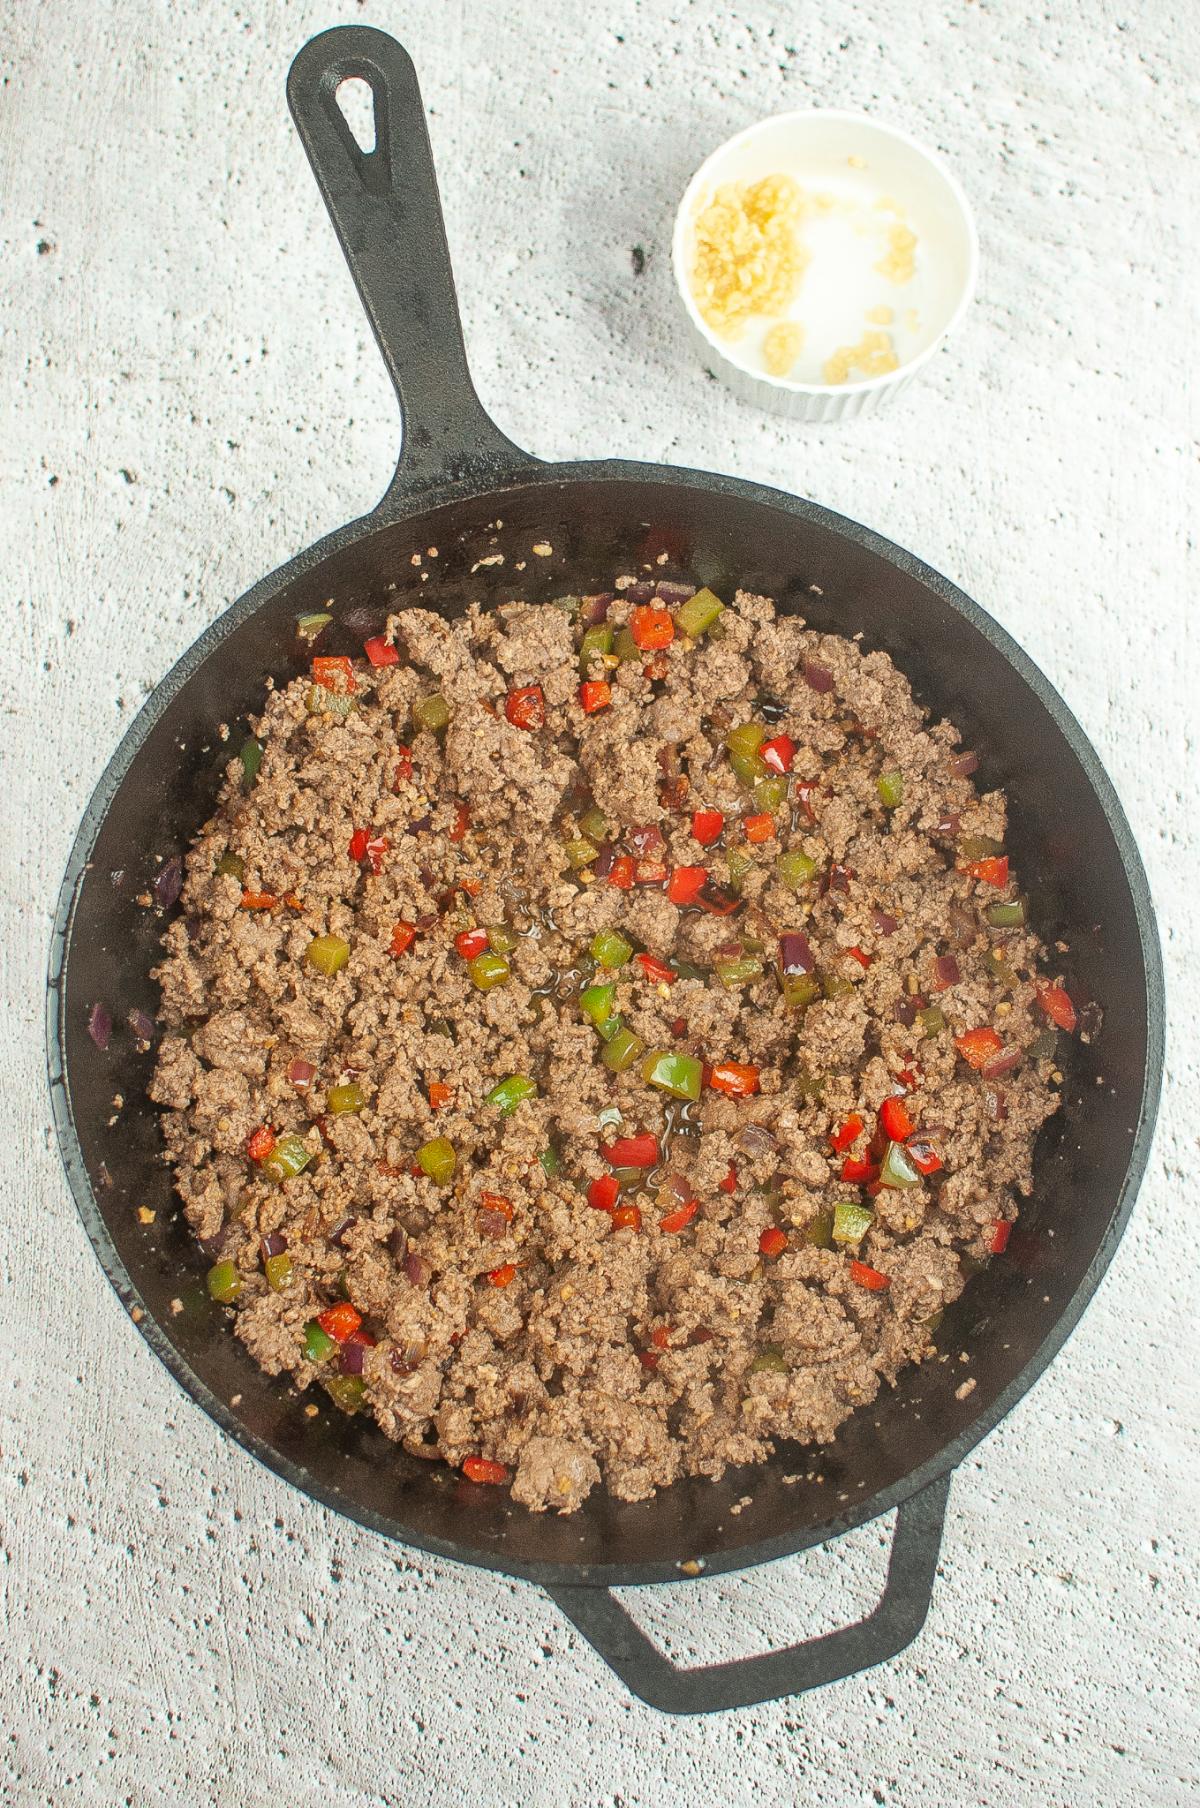 A dutch oven filled with ground beef and vegetables, simmering into a flavorful chili.